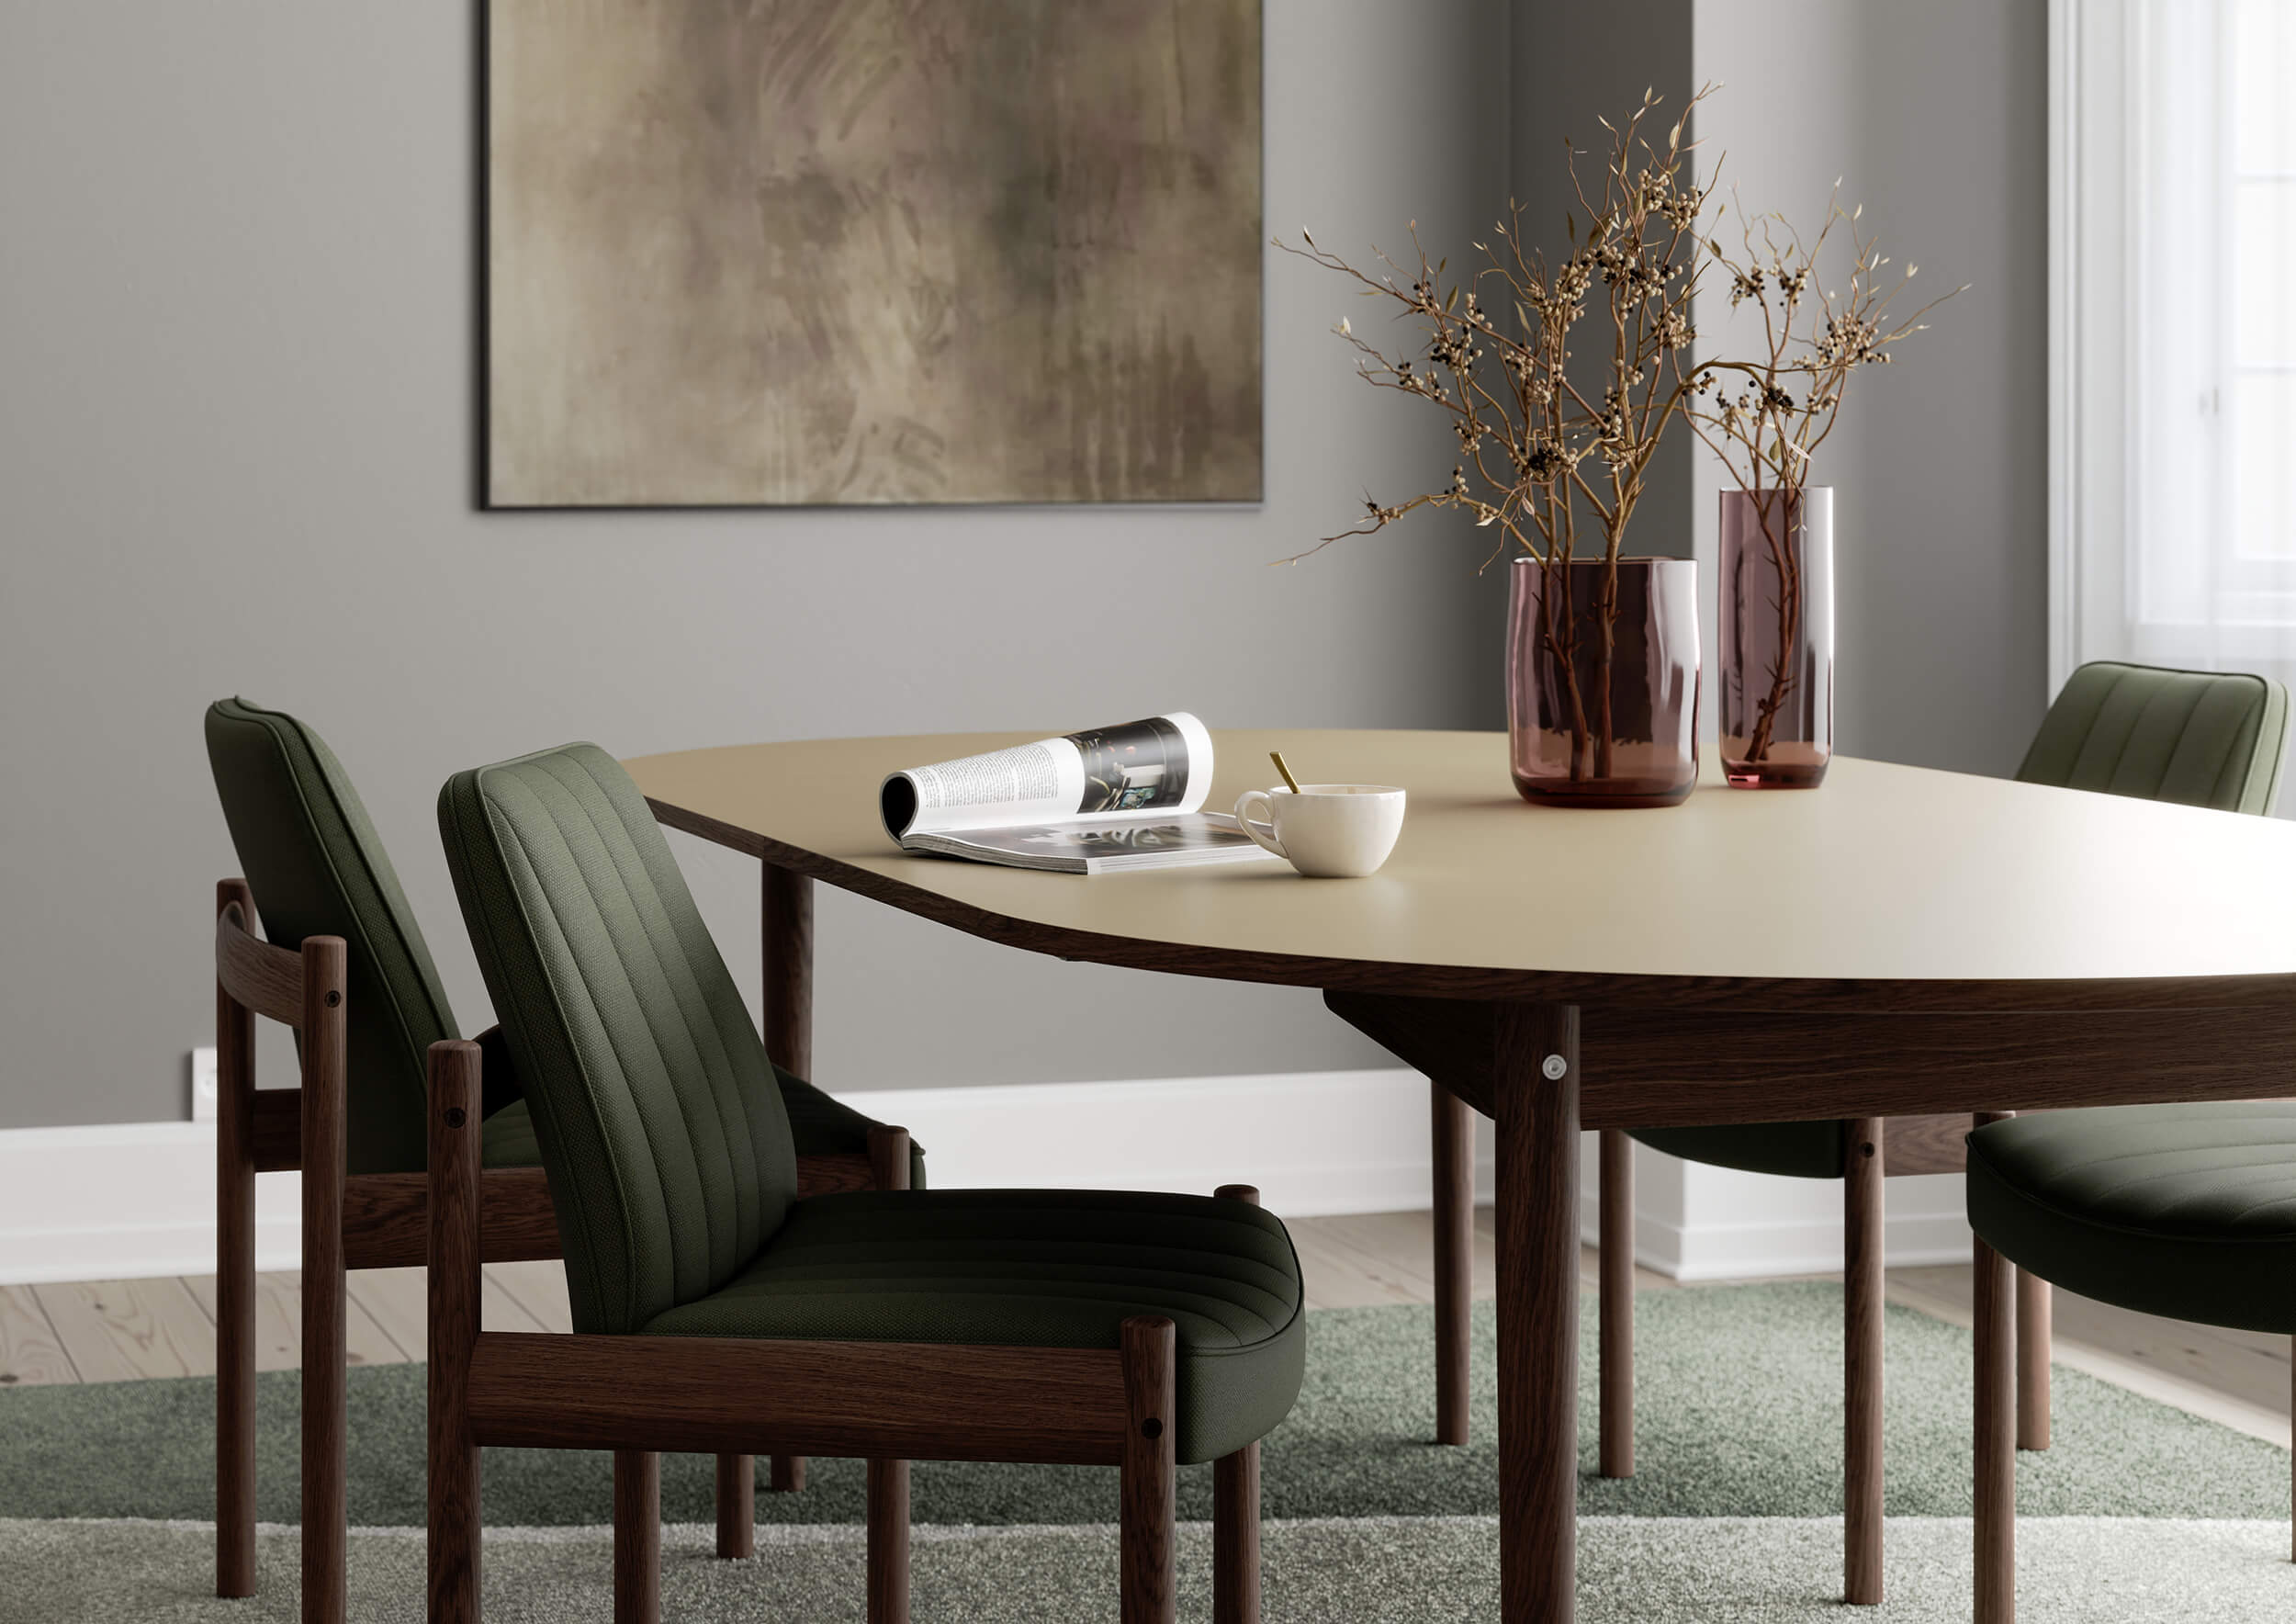 Oma dining table, Ry arm chair